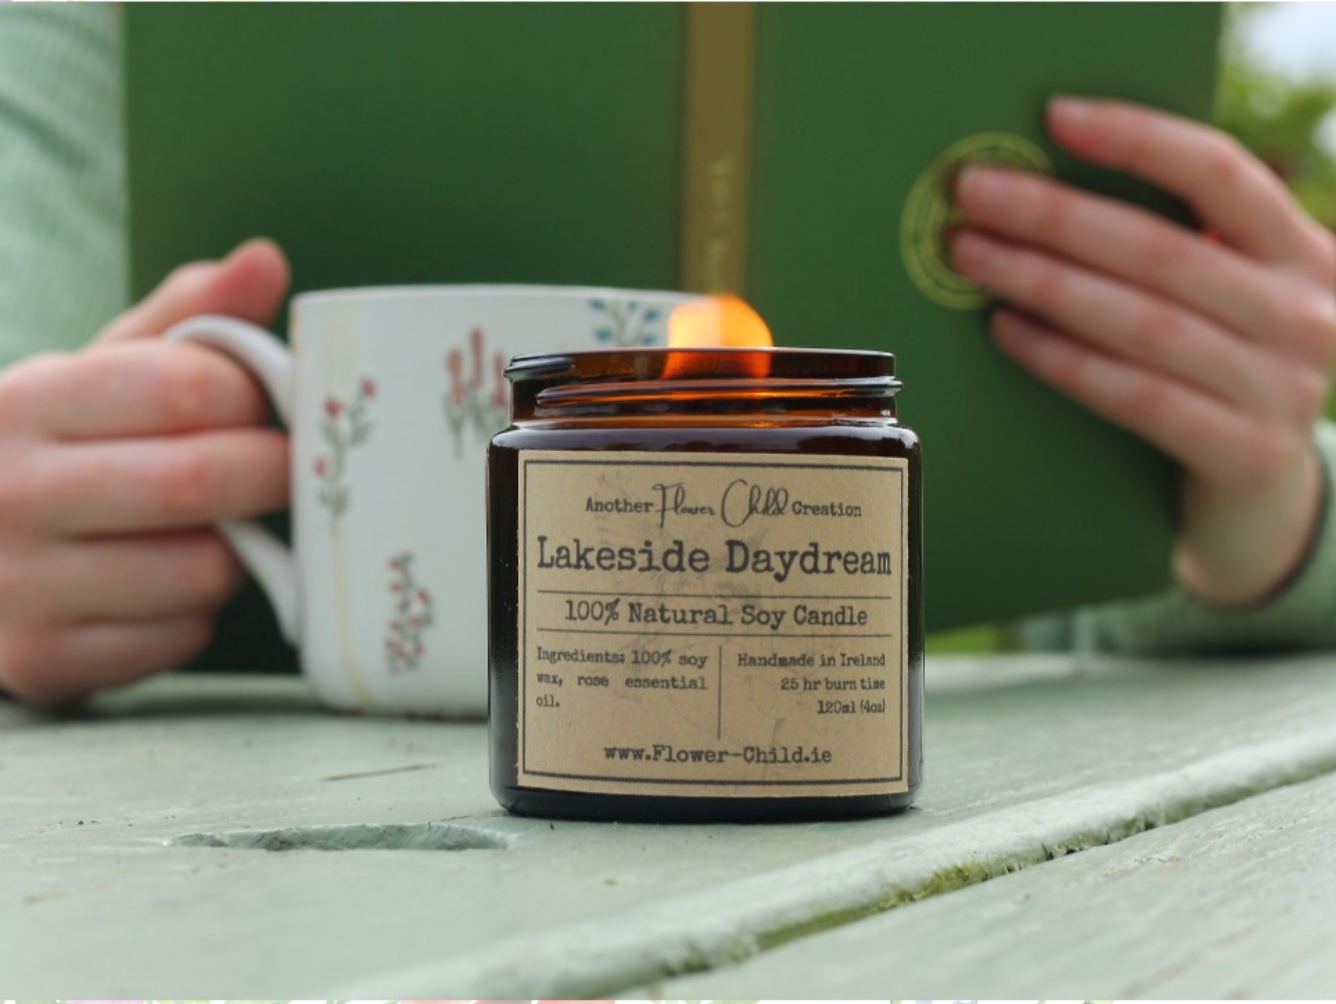 Flower Child, Lakeside Daydream Candle